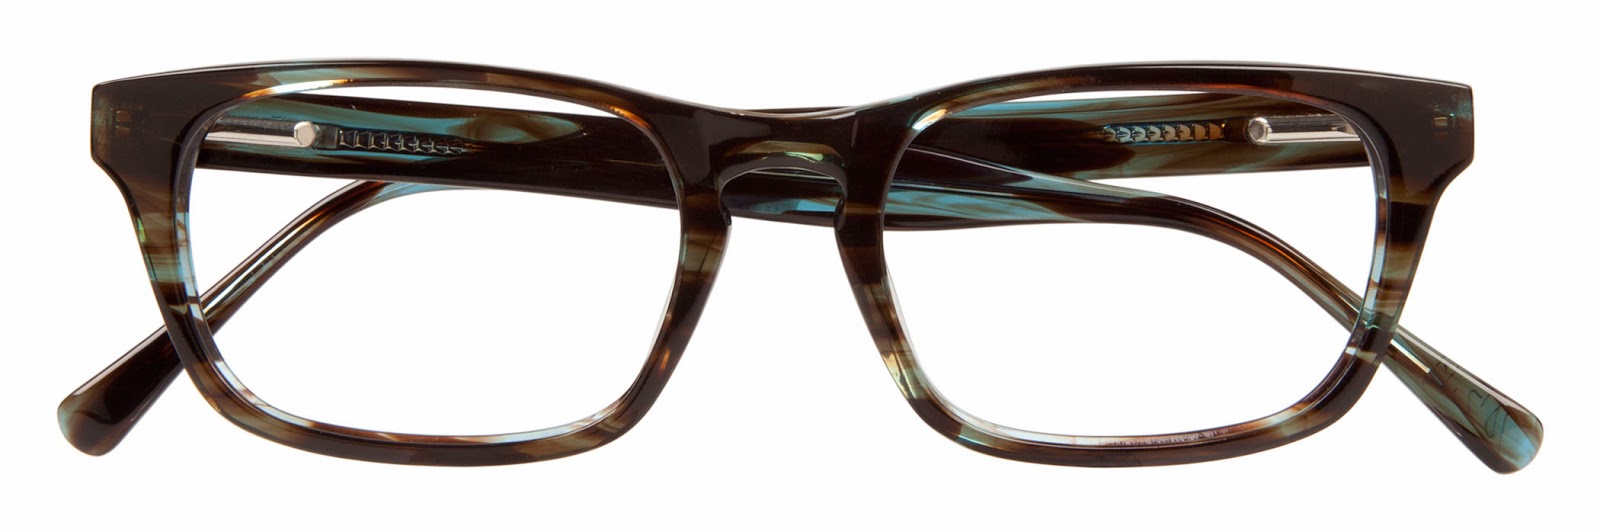 ClearVision Optical - Press Releases: Cole Haan Begins It’s ...